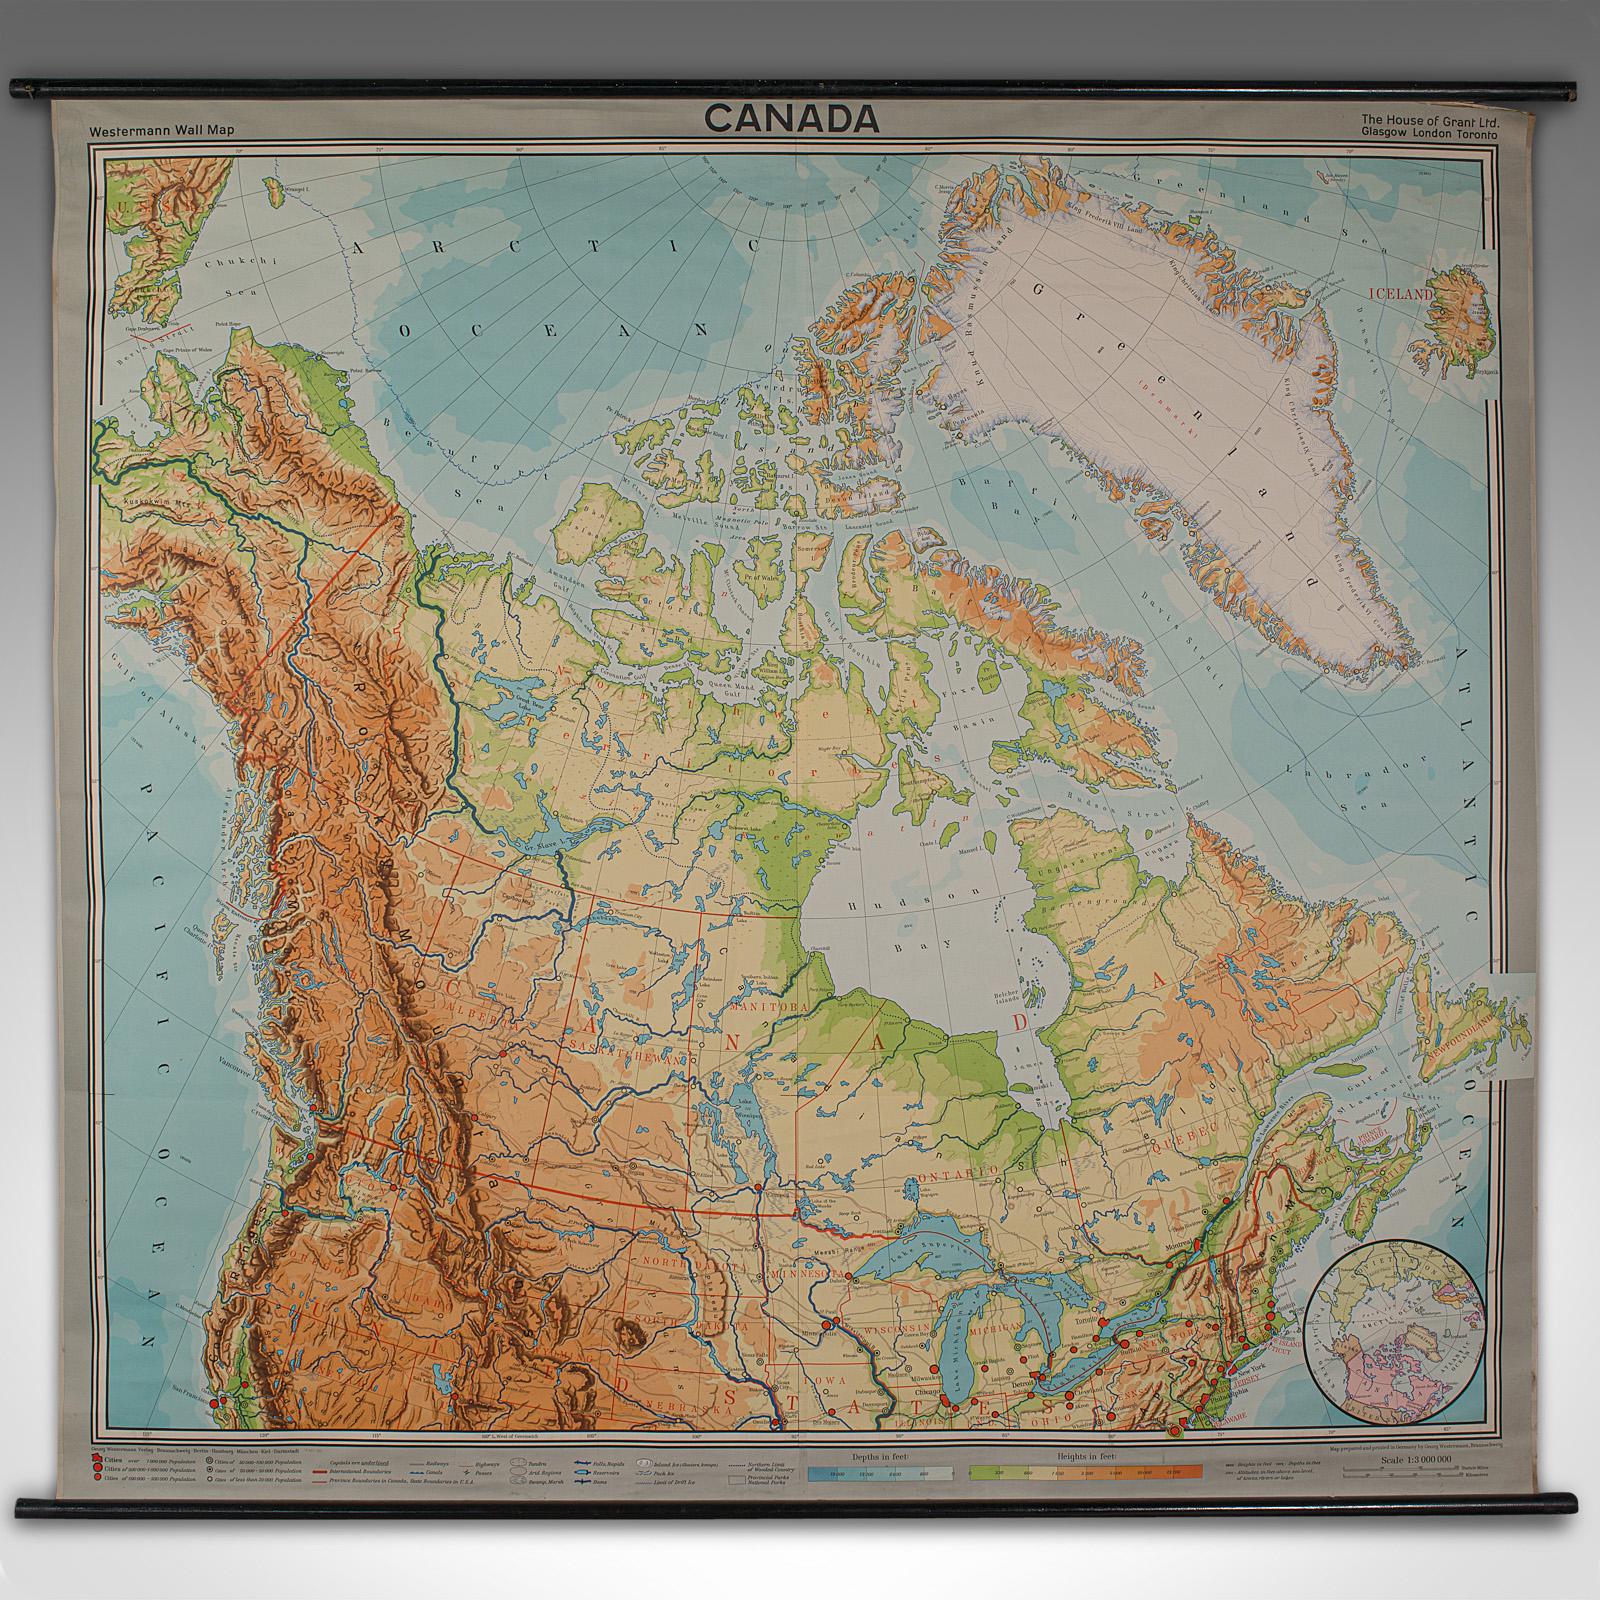 This is a very large vintage map of Canada. A German, quality printed educational or institution map, dating to the mid 20th century, circa 1965.

Striking proportion with superb attention to detail
Displays a desirable aged patina and in good